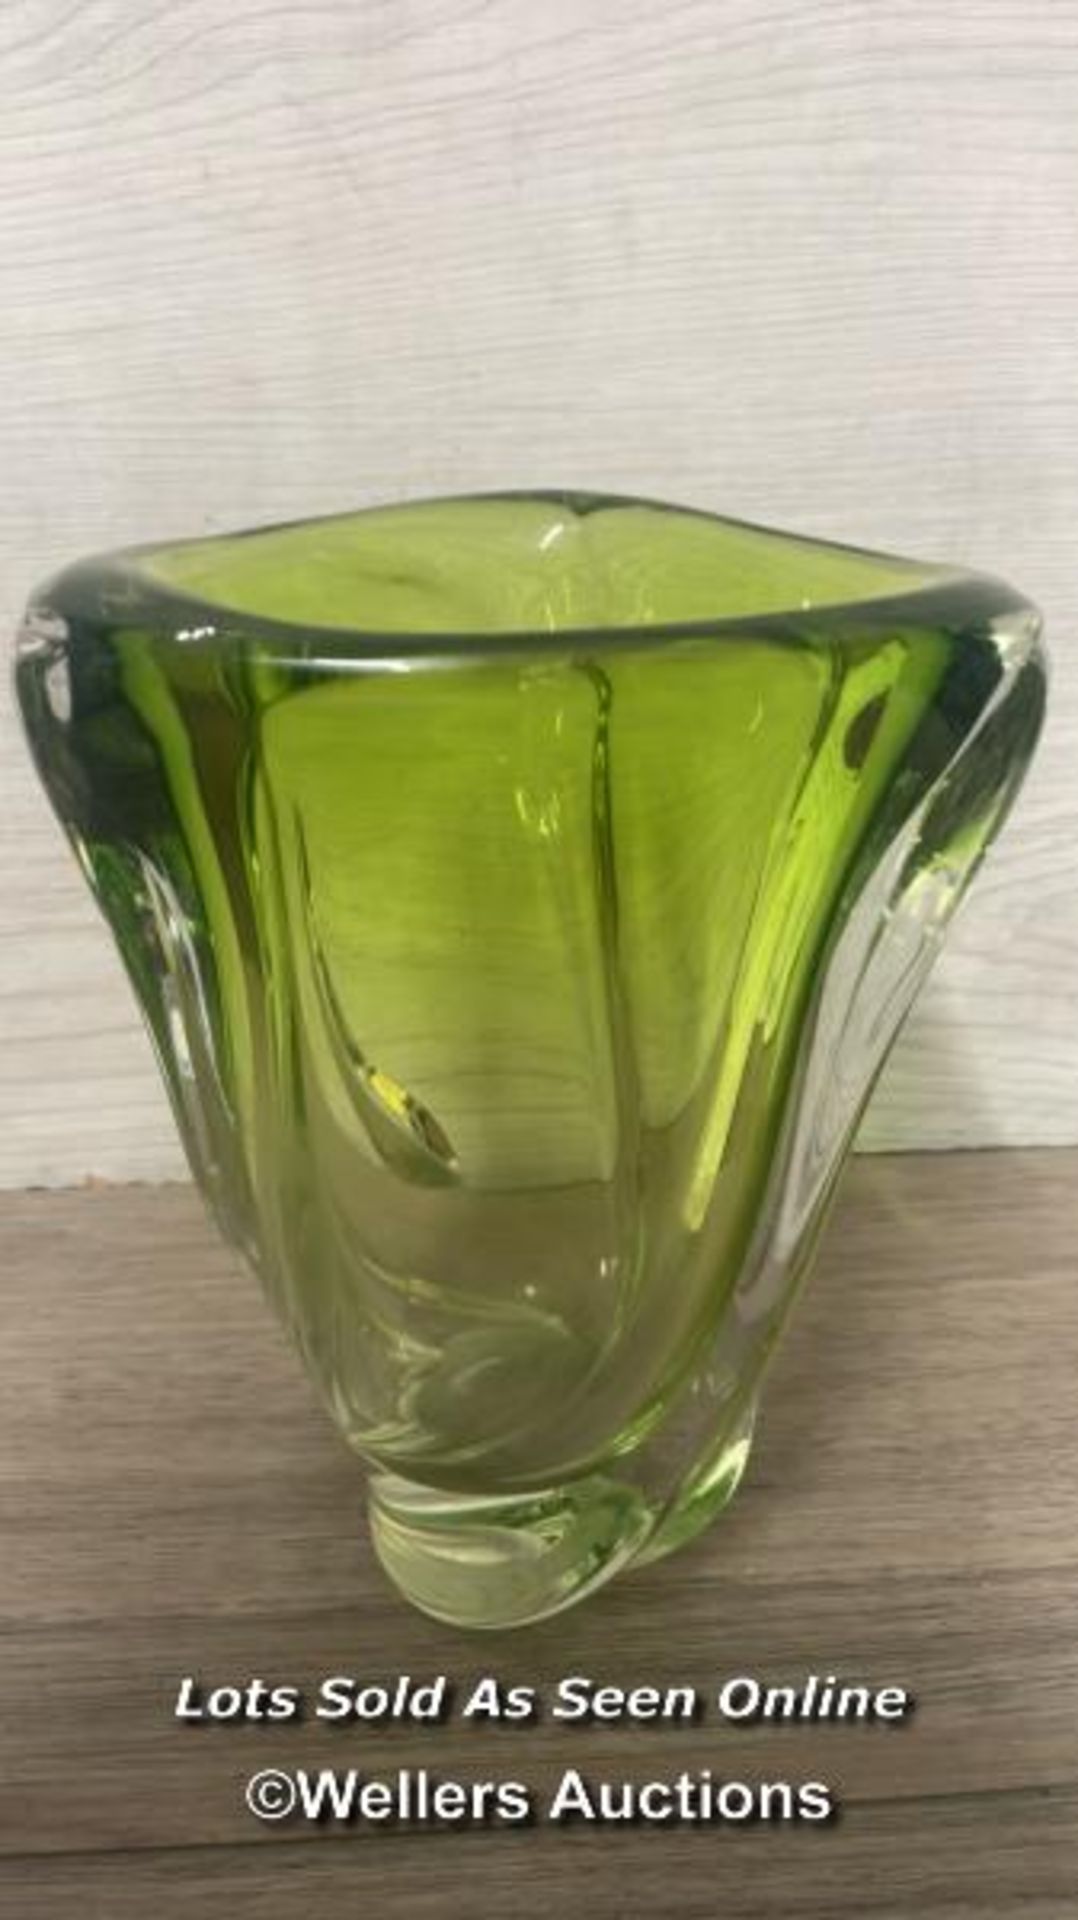 VAL SAINT LAMBERT HEAVY GREEN GLASS VASE OF TWISTED FORM, 18CM HIGH - Image 2 of 6